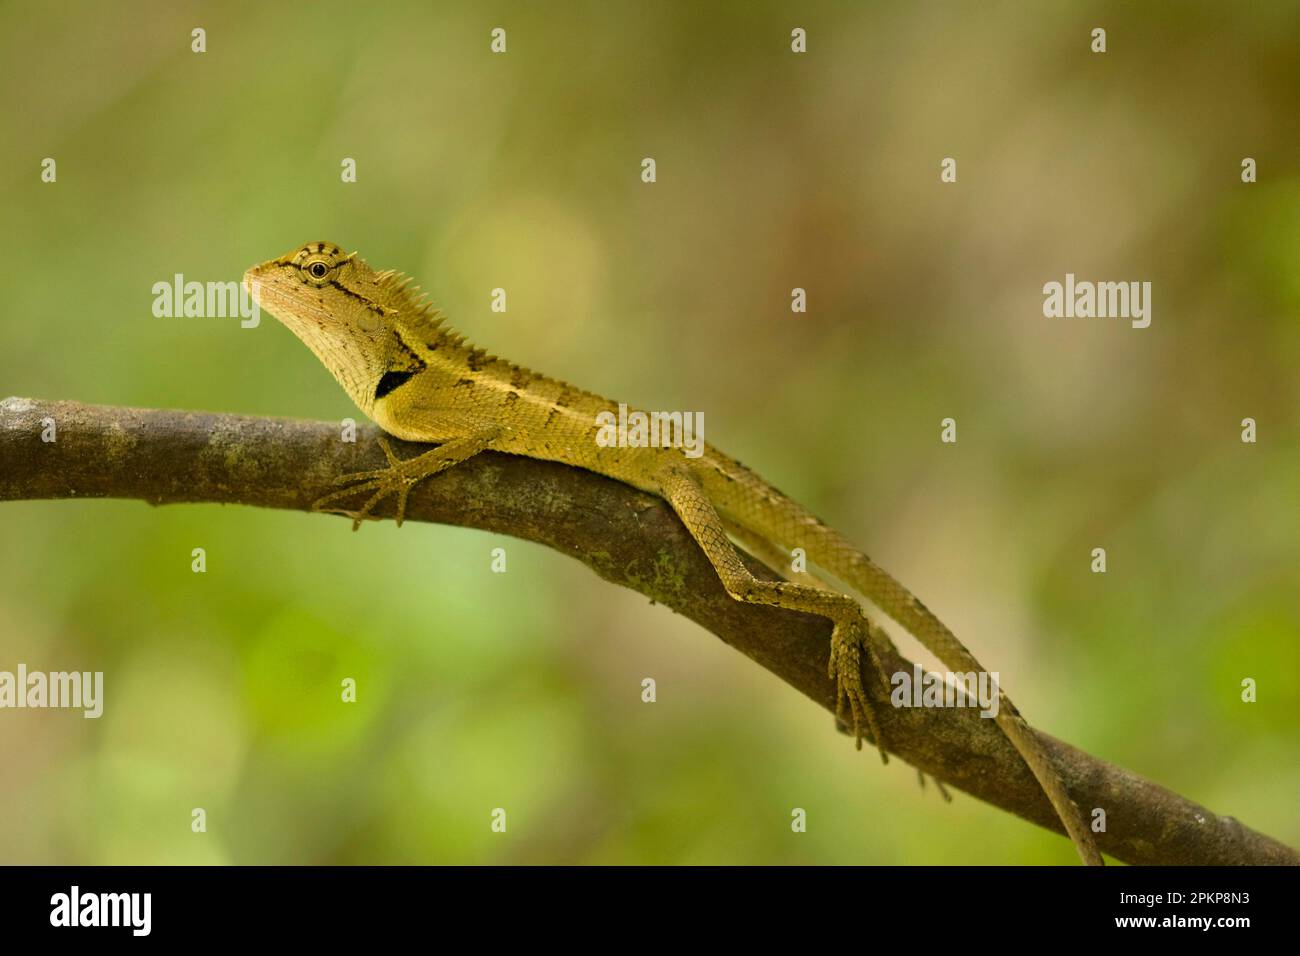 Beautiful Lizard, Beautiful Lizards, Beautiful Lizards, Agamas, Other Animals, Reptiles, Animals, Forest Crested Agama (Calotes emma emma) adult, rest Stock Photo